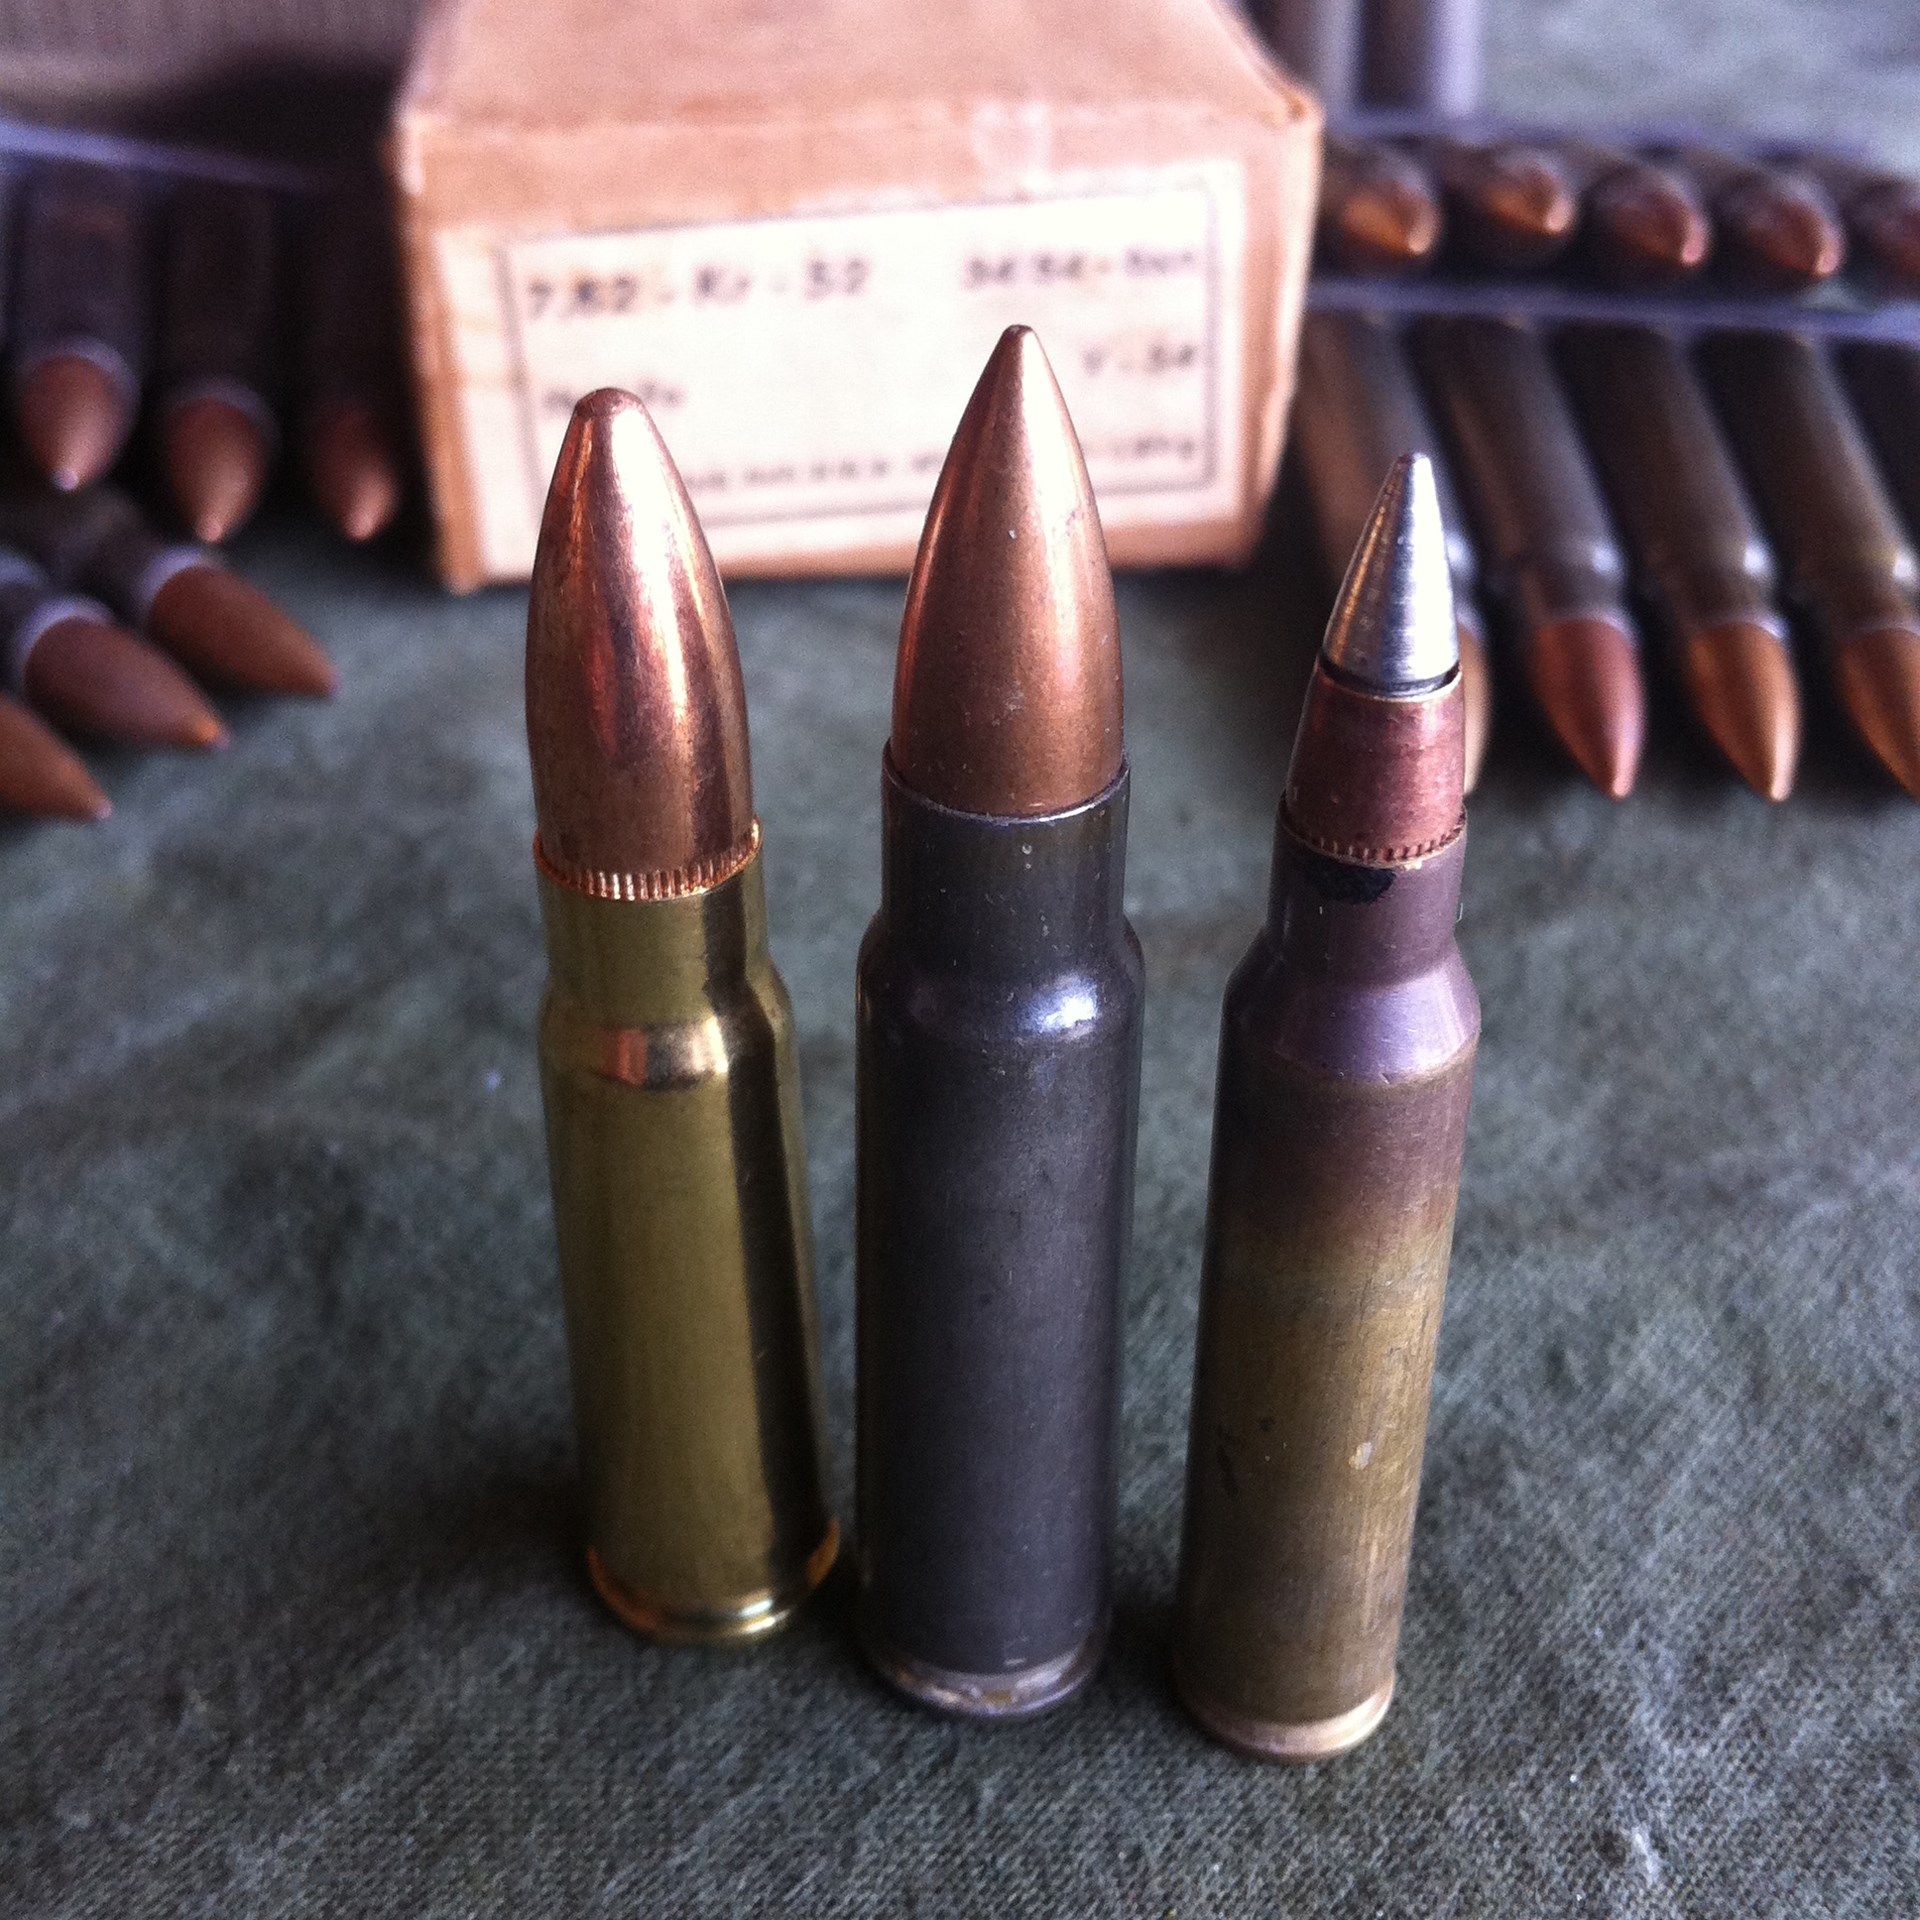 A 7.62×39 mm cartridge (left), a 7.62×45 mm cartridge (center), and a 5.56×45 mm M855A1 cartridge (right) are seen here together for comparison. In the background is an original box of Czech 7.62×45 mm ammunition and five stripper clips loaded with 7.62×45 mm cartridges for the vz. 52 rifle. Image courtesy of Martin K.A. Morgan.